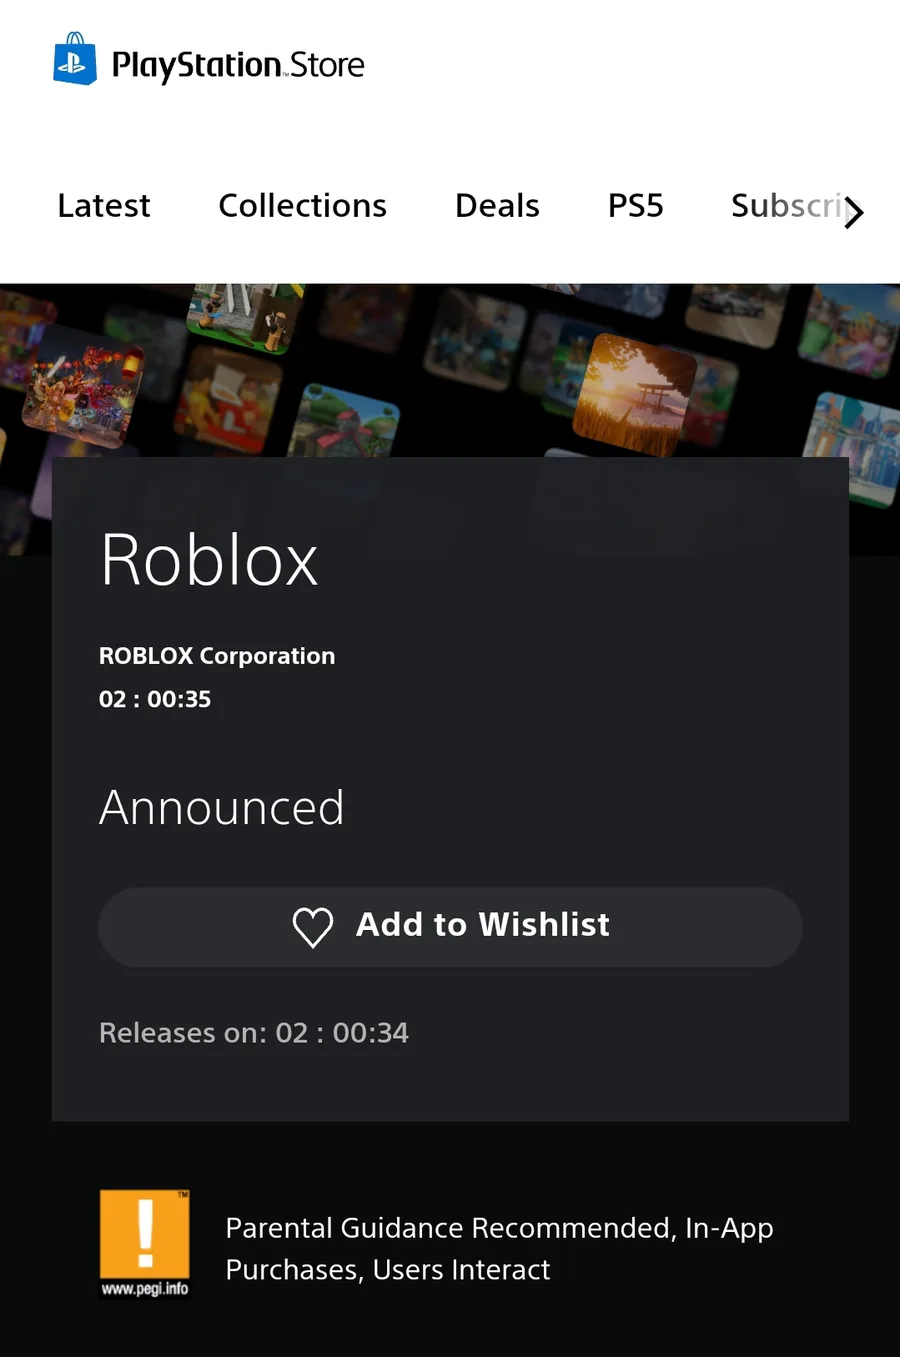 Roblox will be released on PlayStation 4 and 5 in October